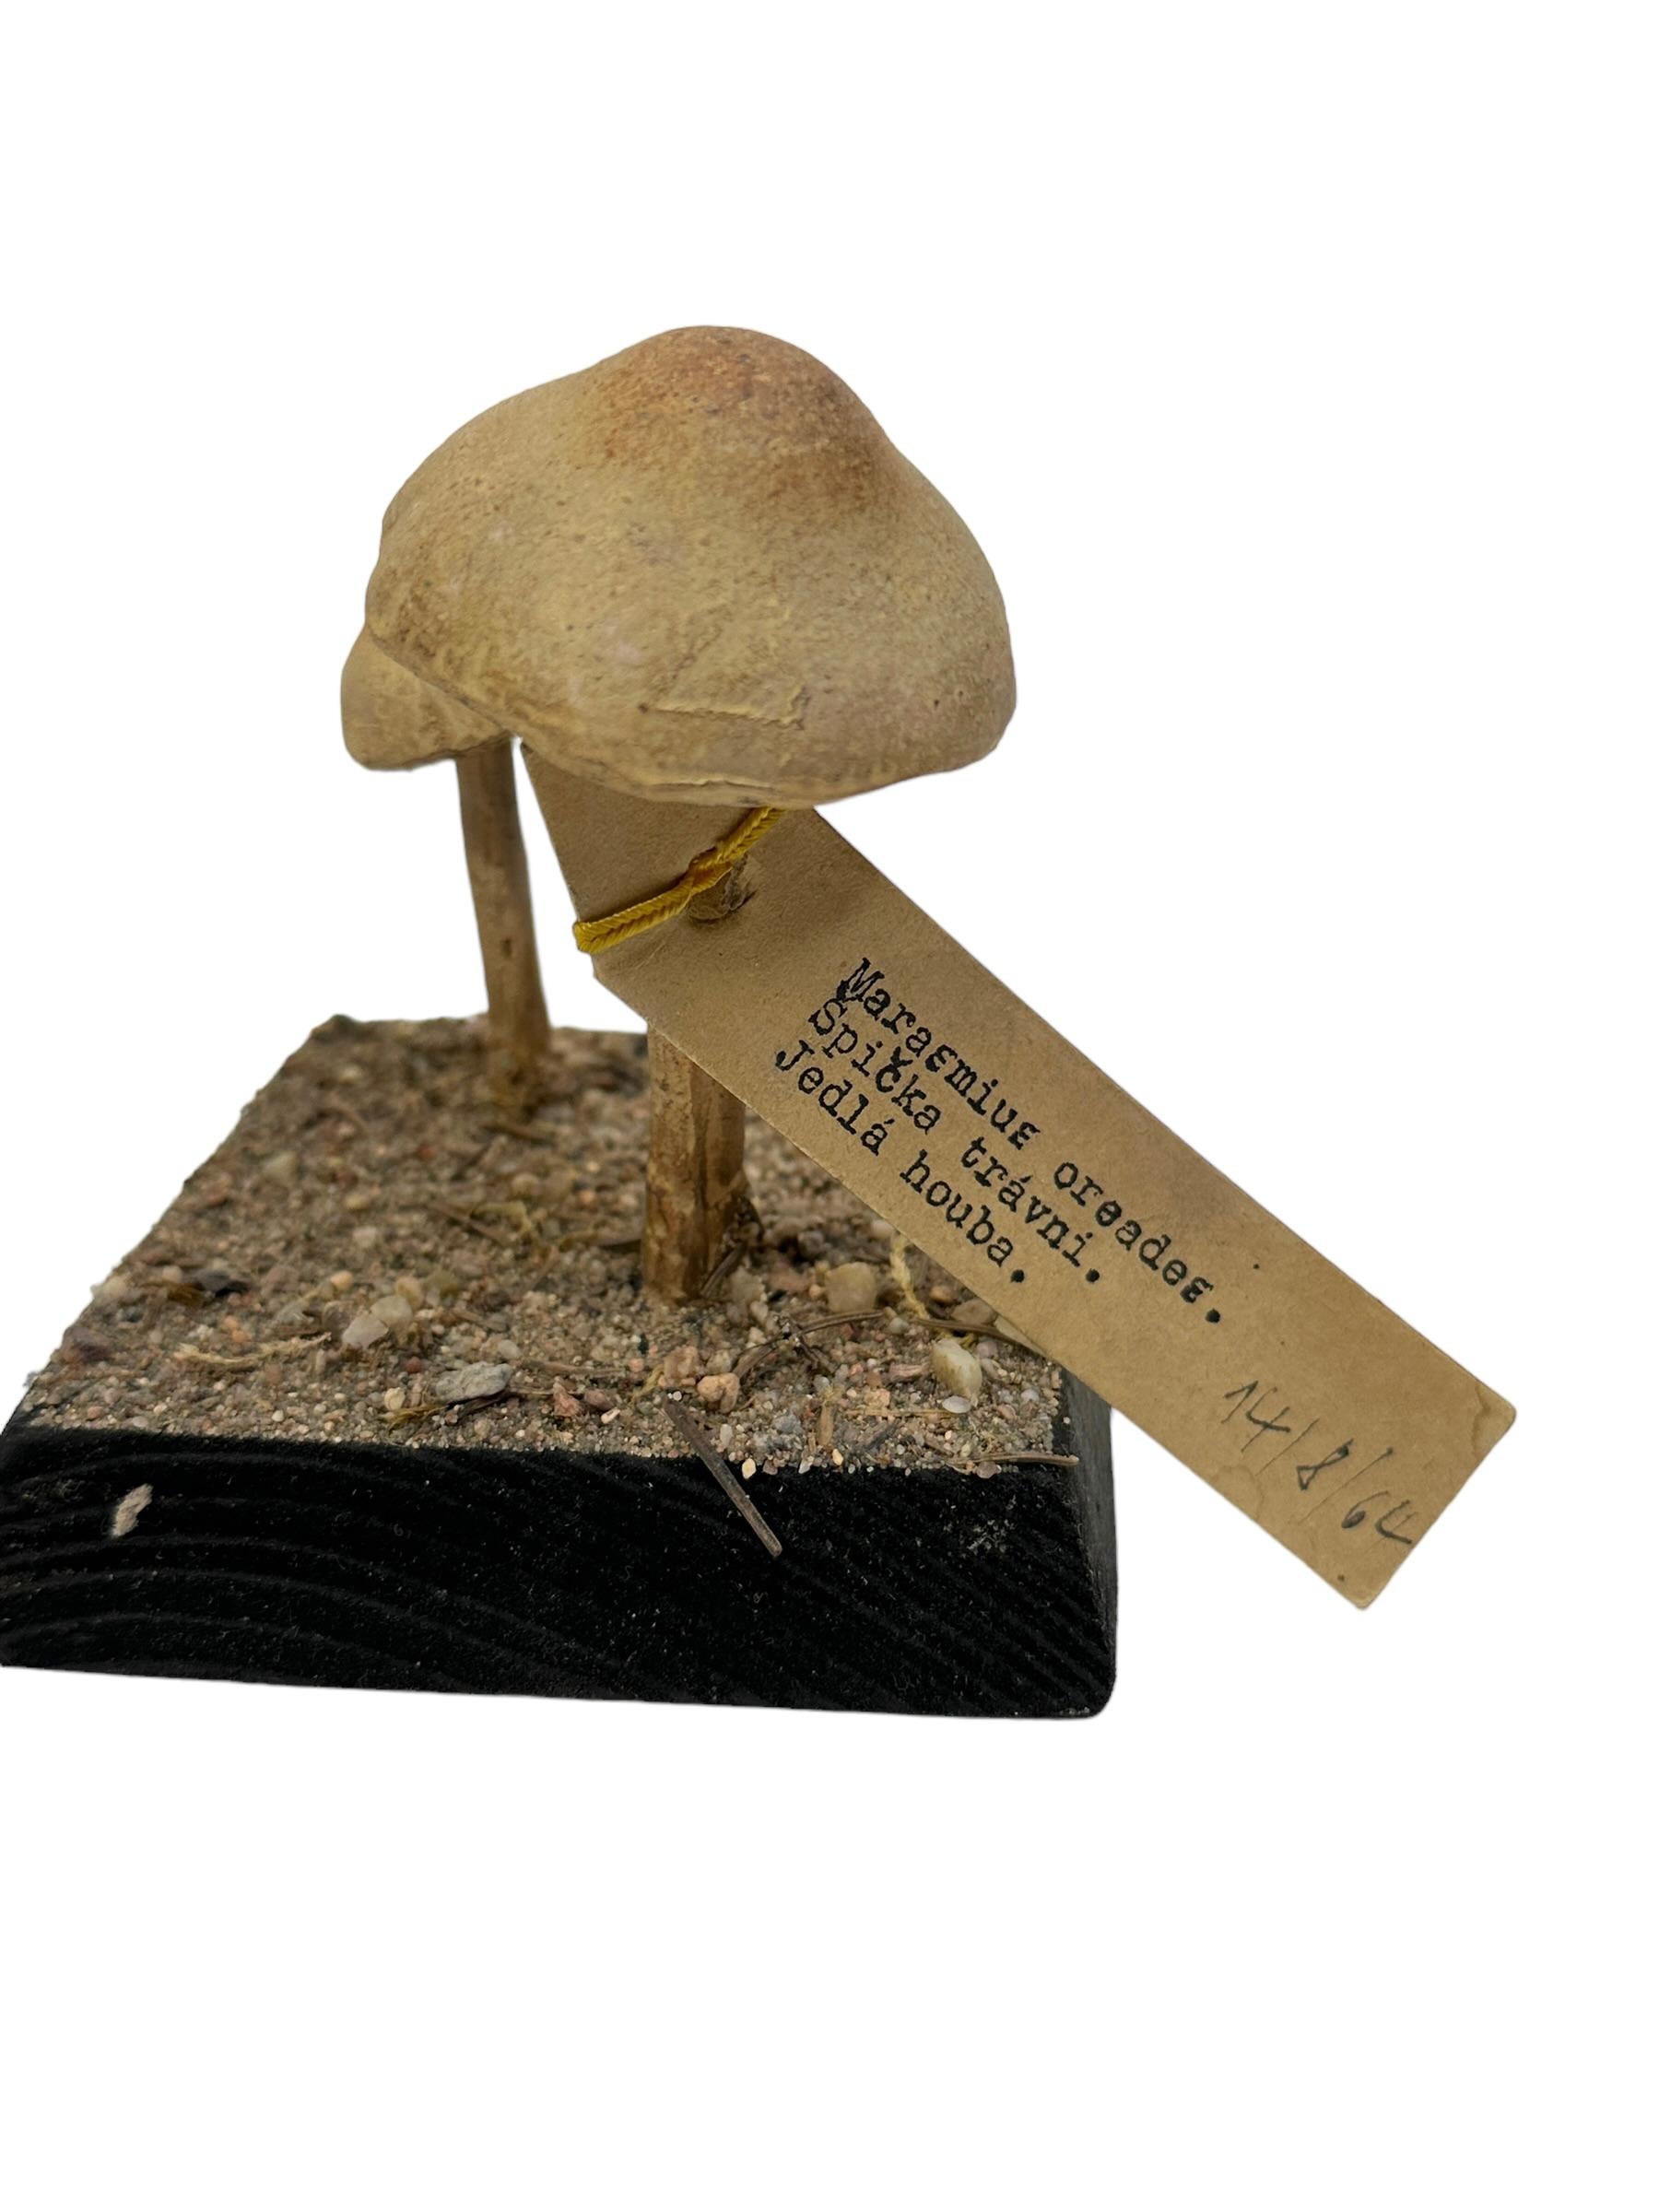 This rare vintage model of a botanical scientific specimen depicts a mushroom native to Central Europe. This kind of items are used as teaching material in German schools or as showpieces in pharmacies. Colorful in natural design they show the